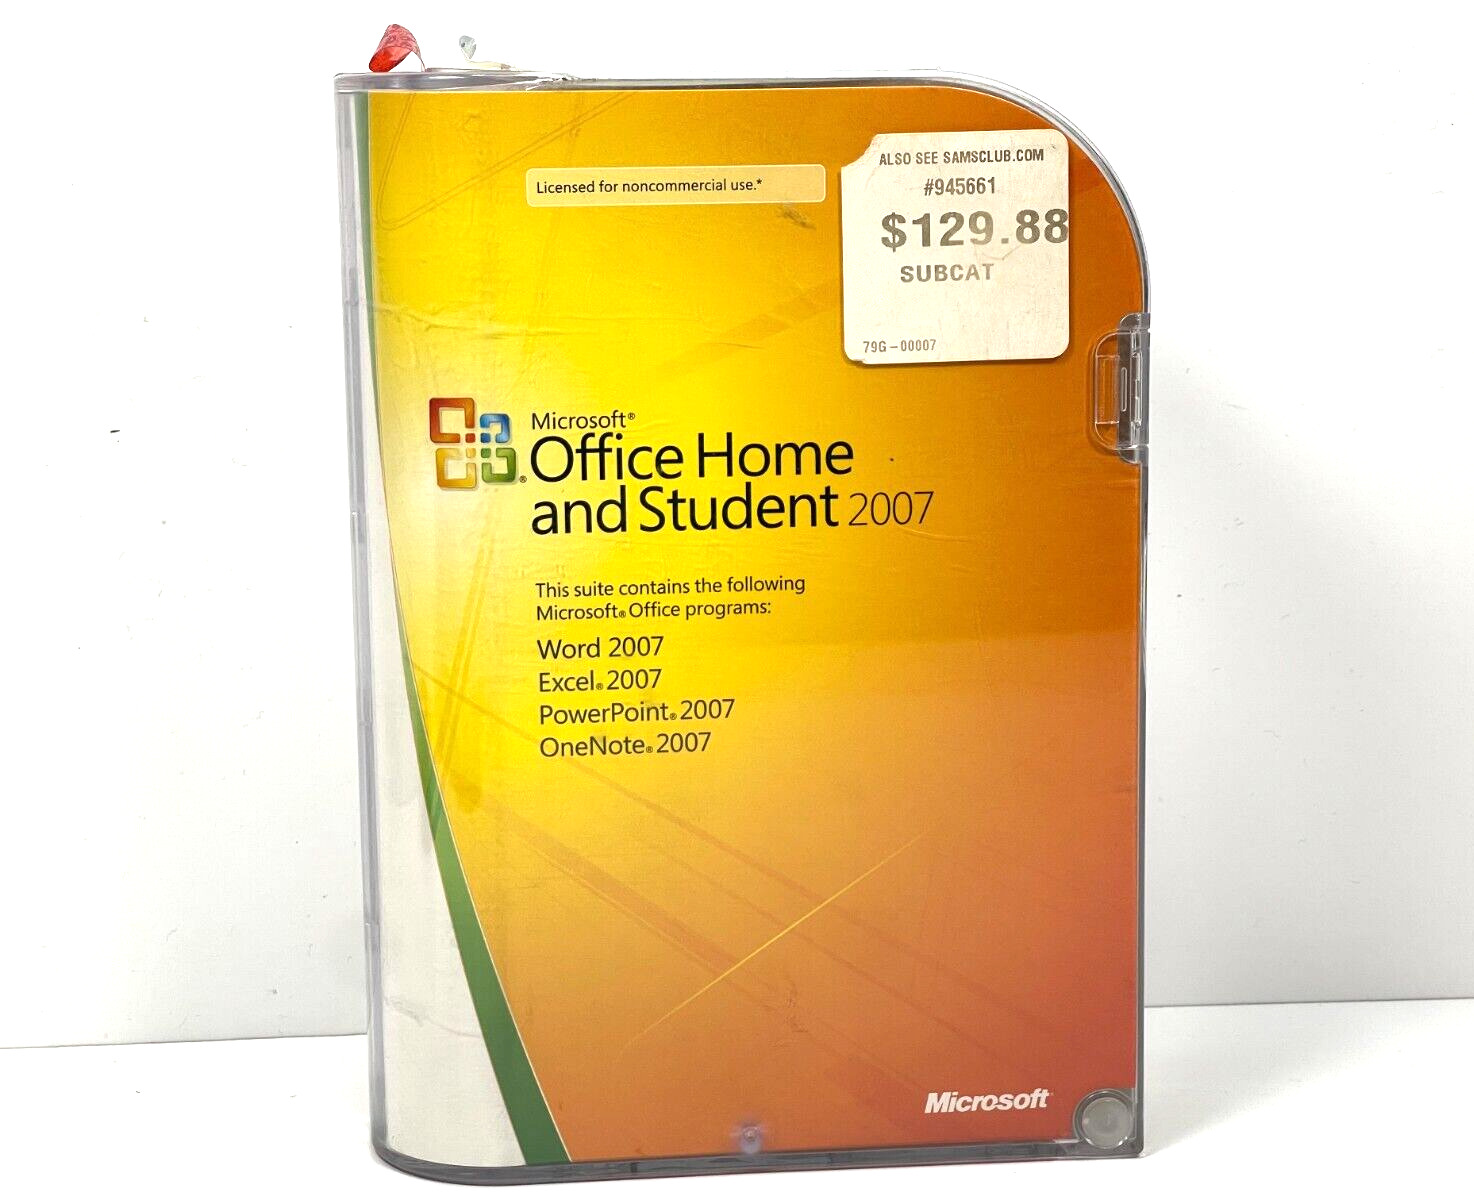 Microsoft Office 2007 Home and Student w/ Product Key - Excel, Word, PowerPoint